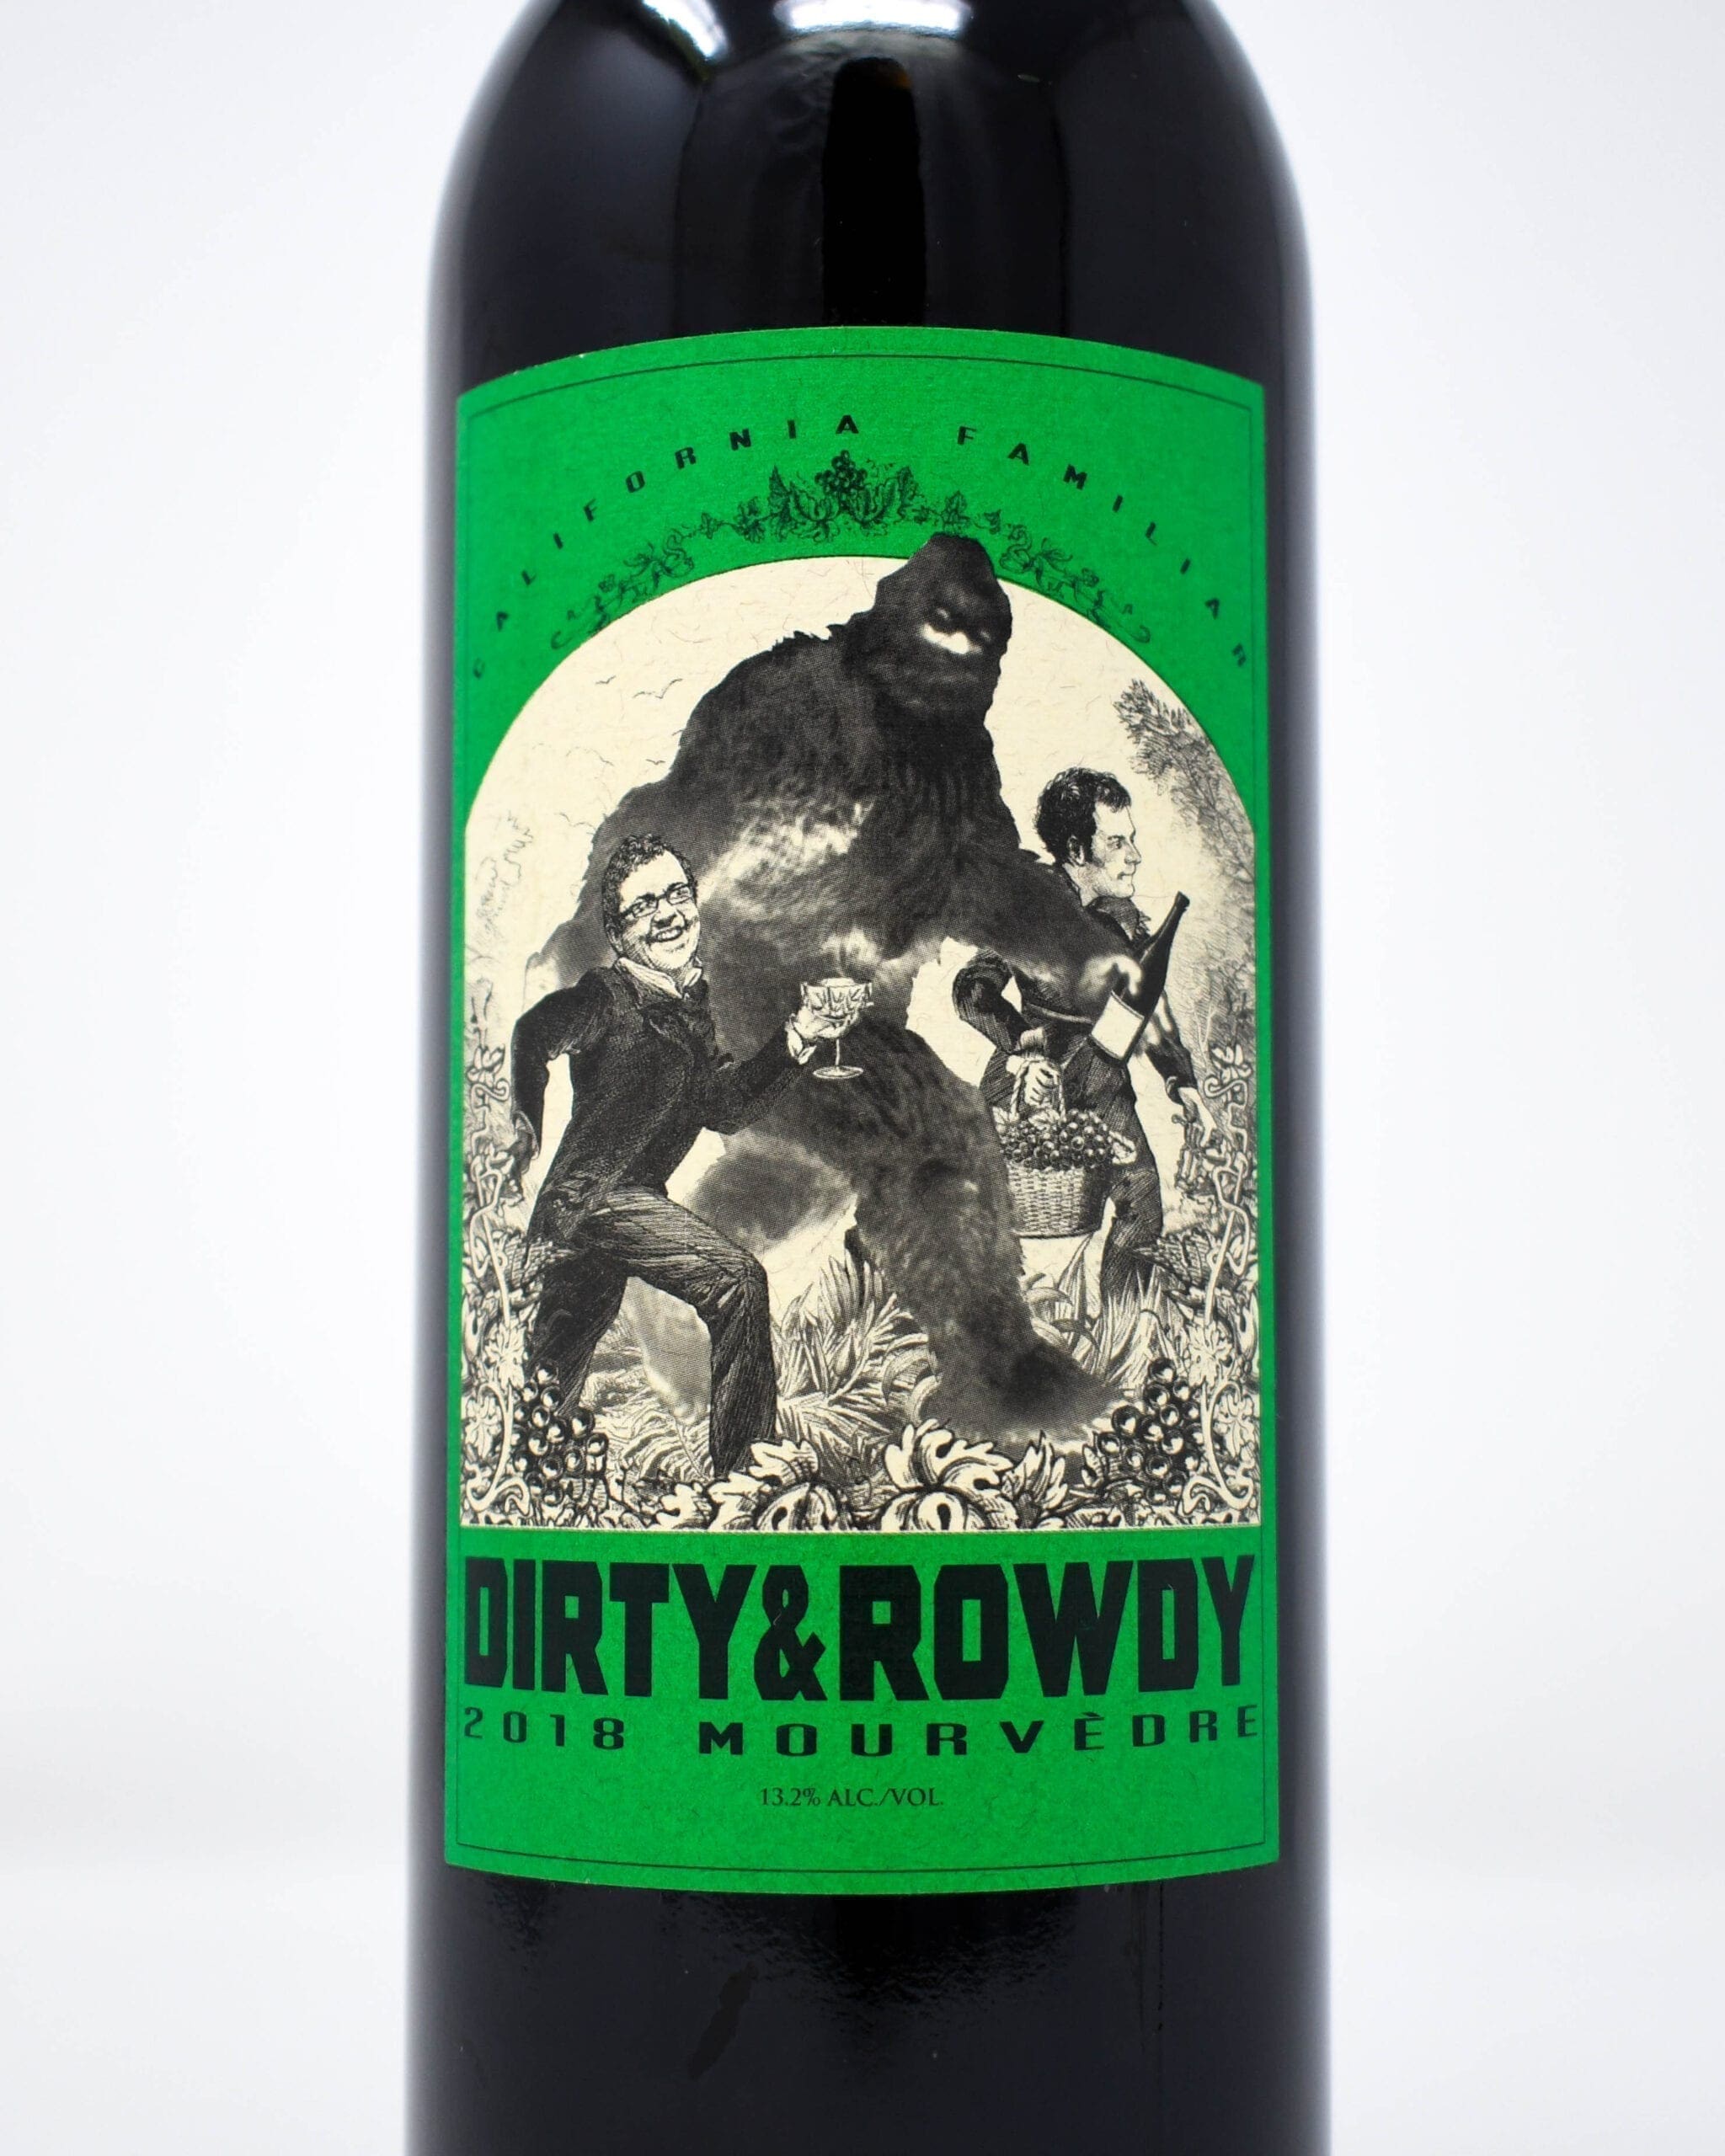 Dirty & Rowdy Mourvedre